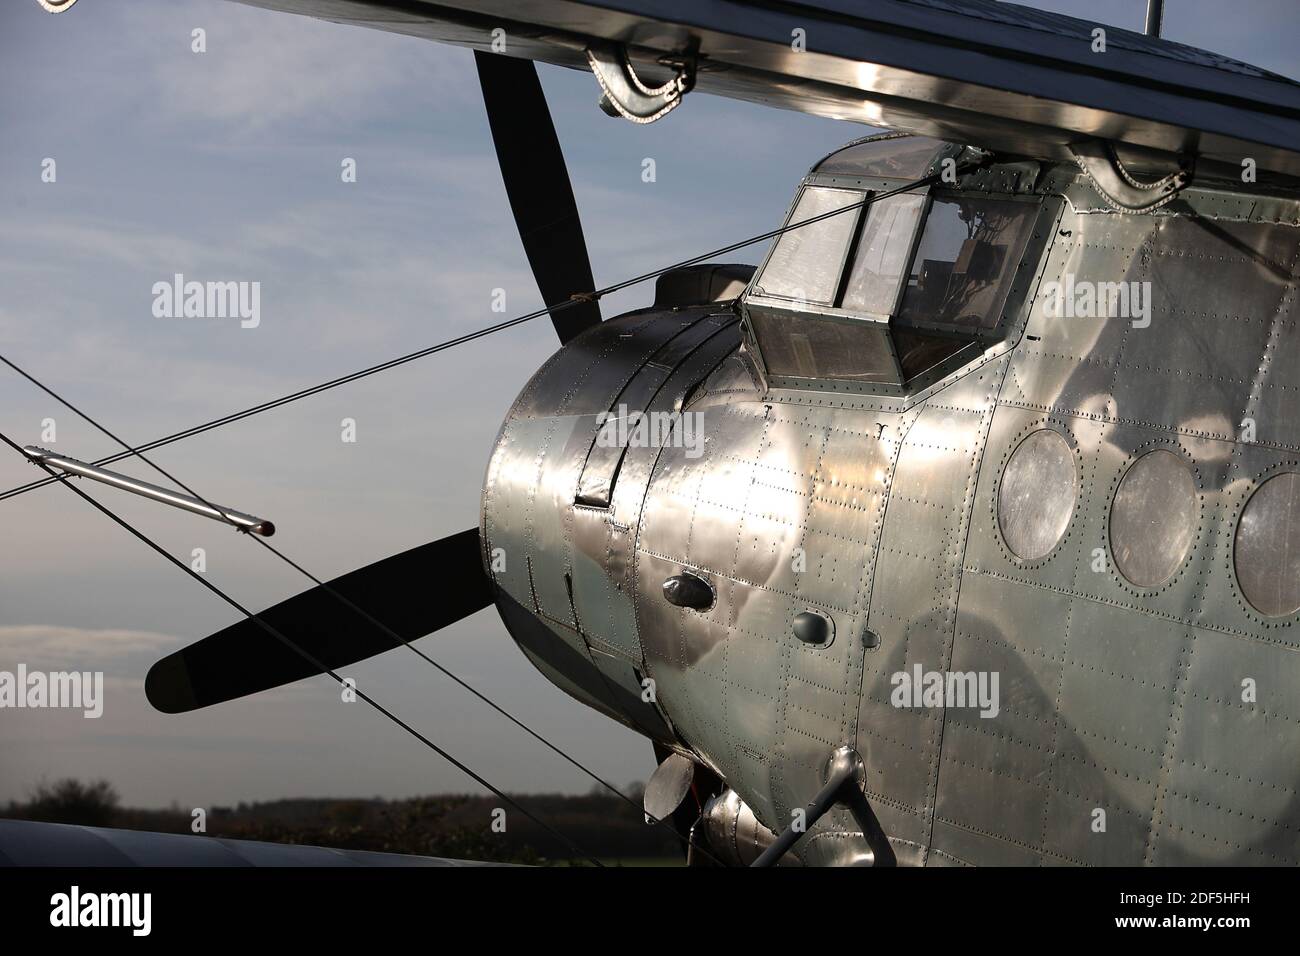 Antonov AN-2 Russian military Biplane call sign LY-AUP Stock Photo